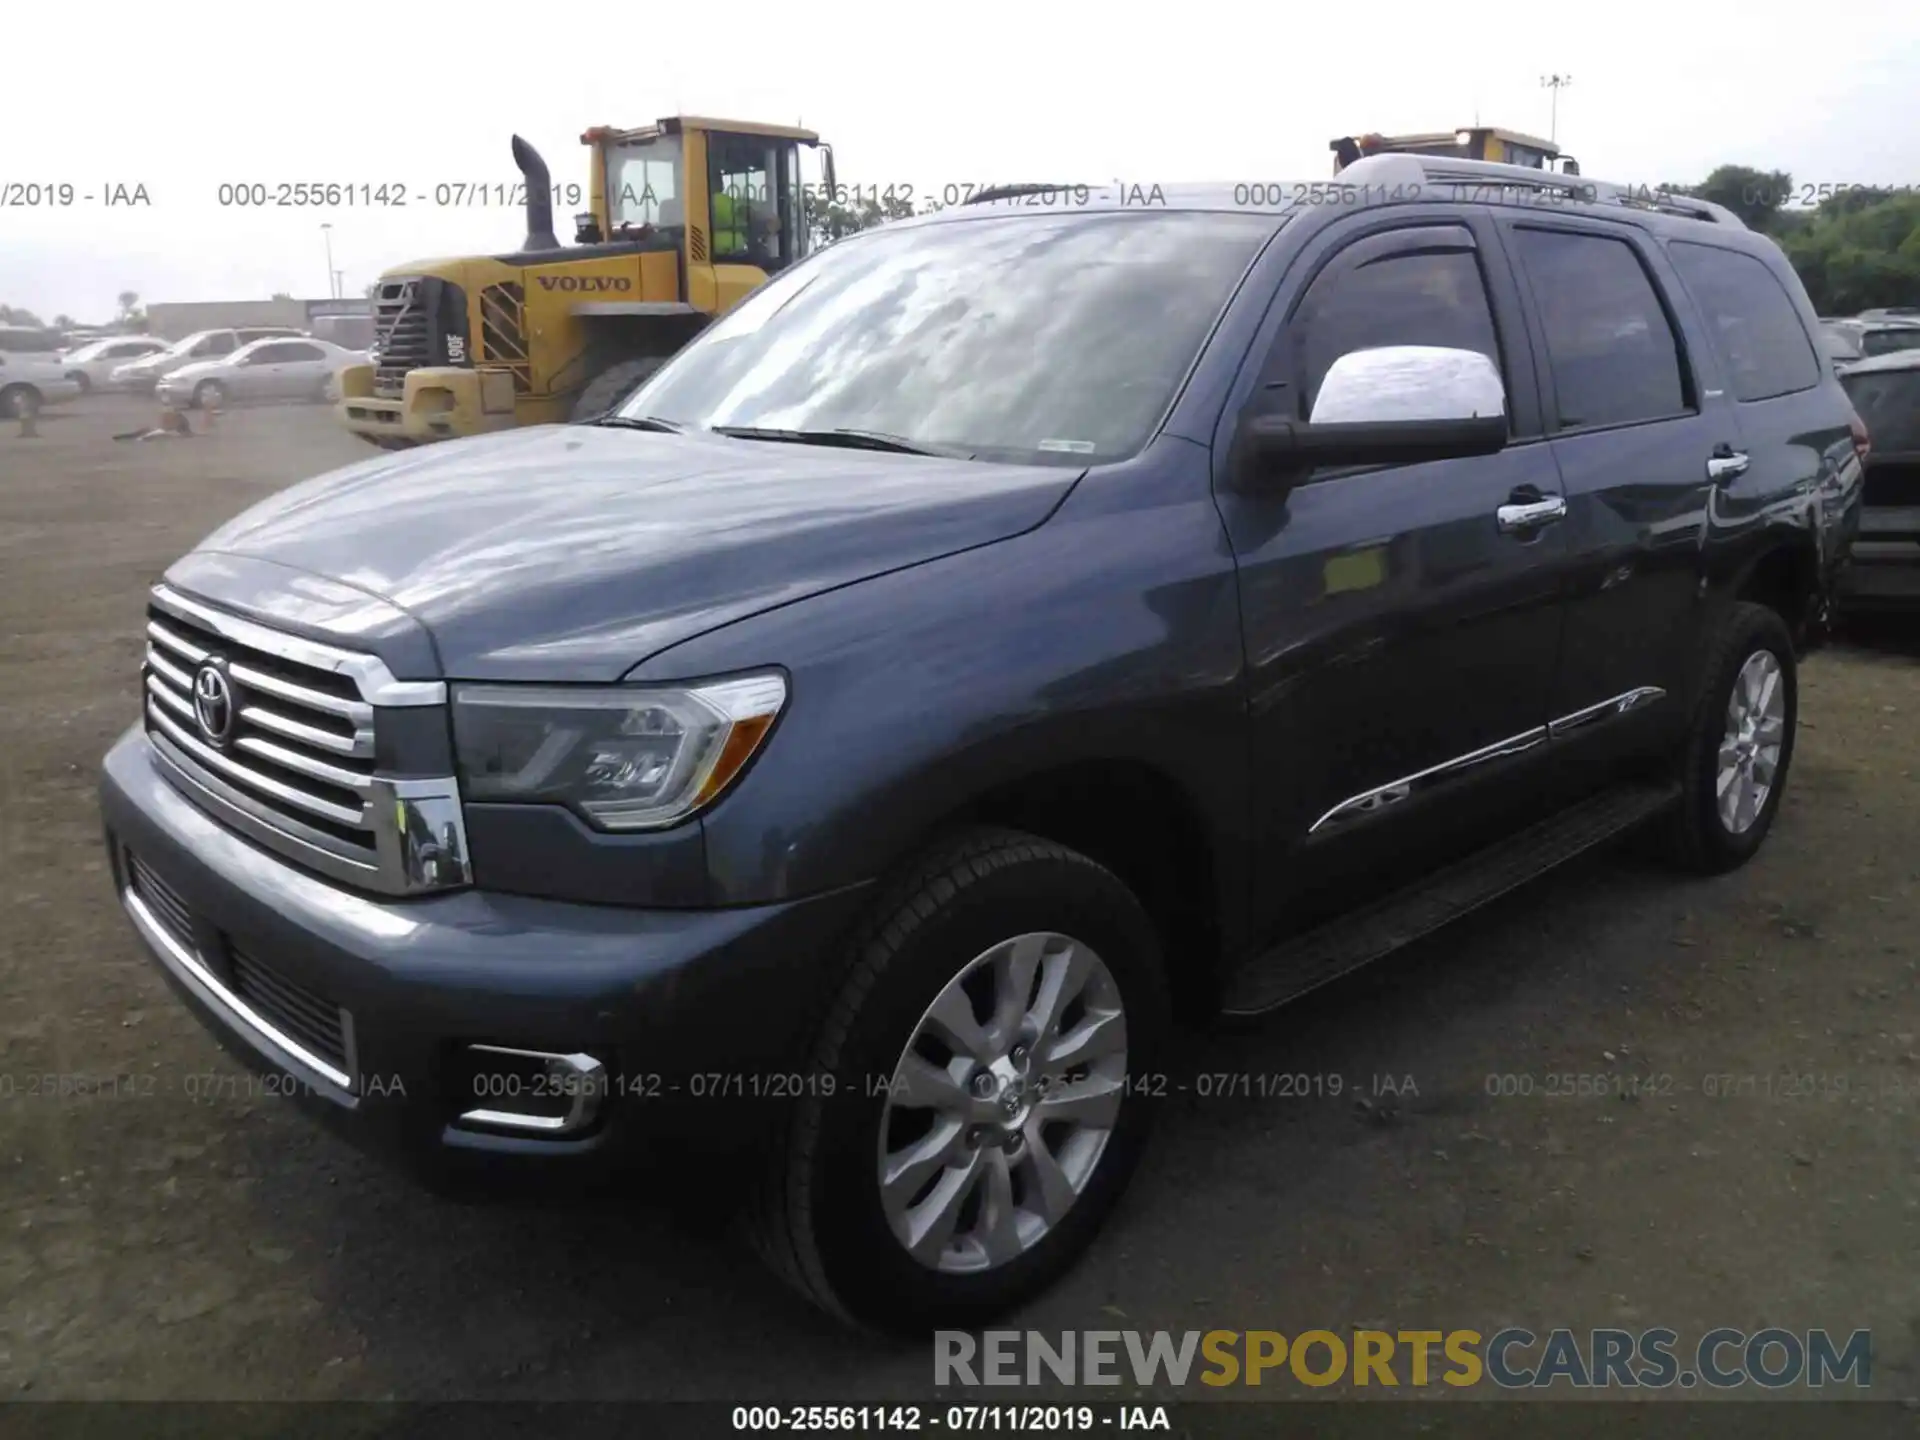 2 Photograph of a damaged car 5TDDY5G19KS165664 TOYOTA SEQUOIA 2019